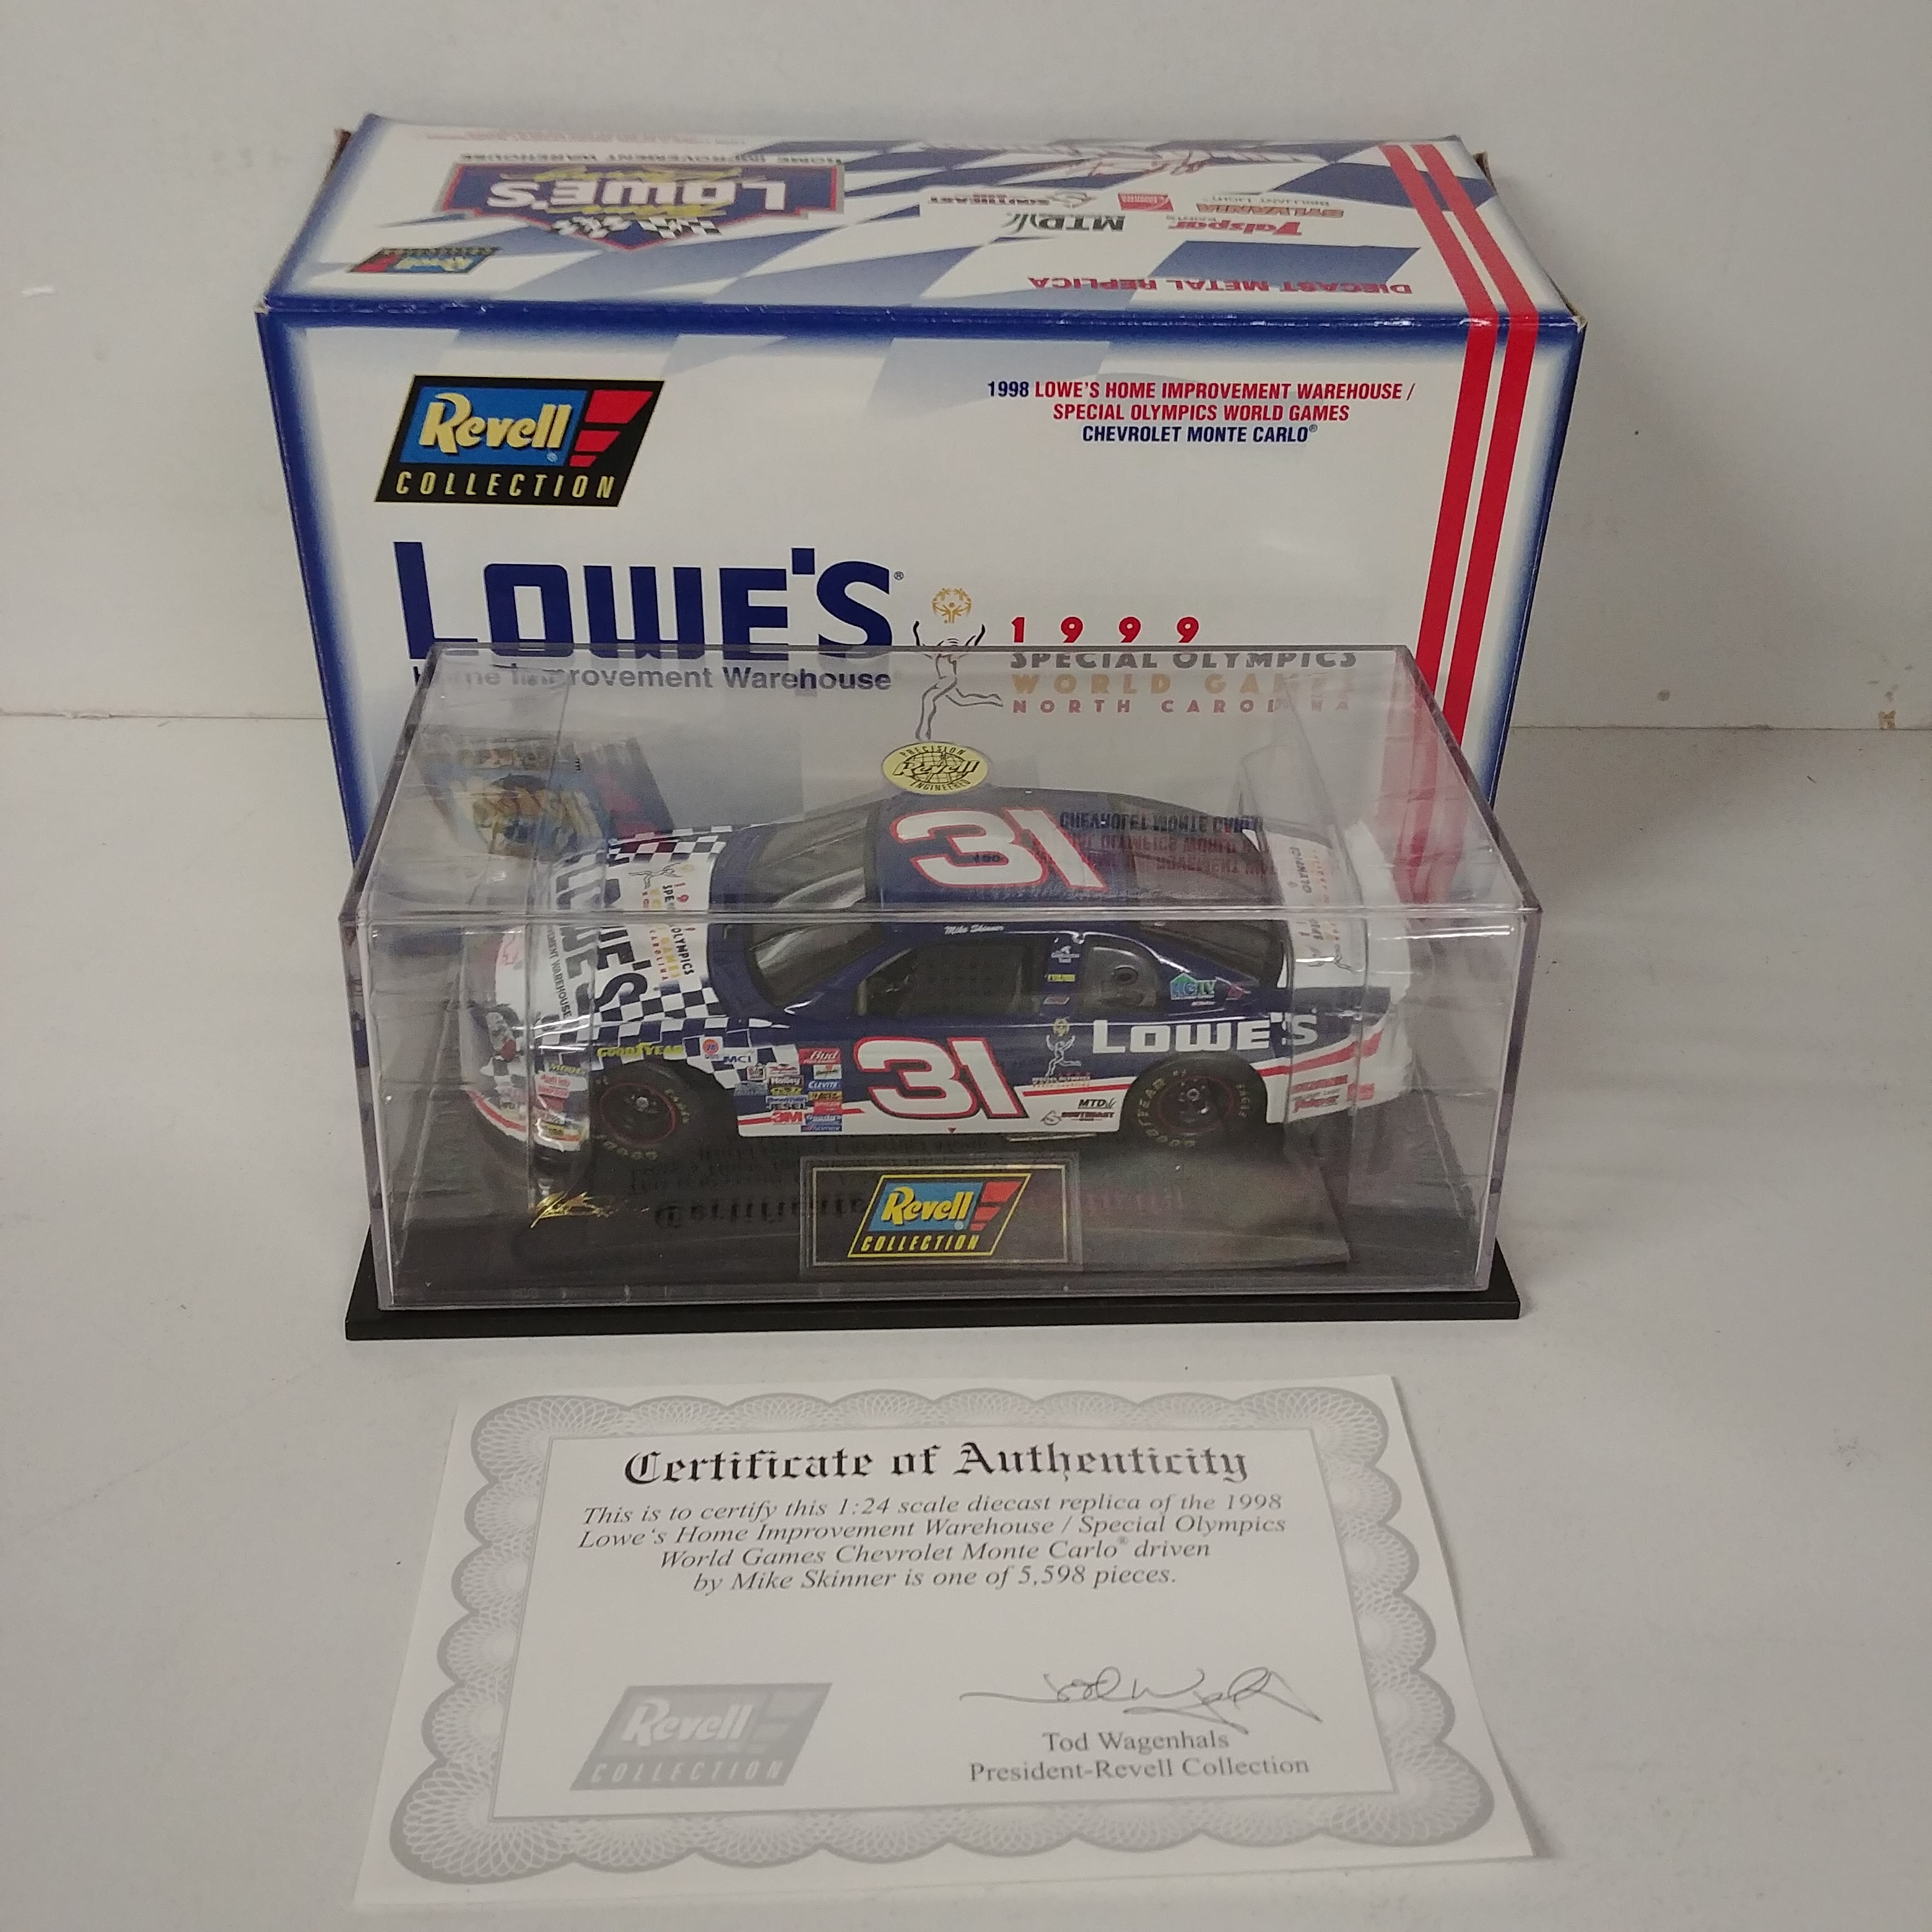 1998 Mike Skinner 1/24th Lowe's  "Special Olympics" c/w car